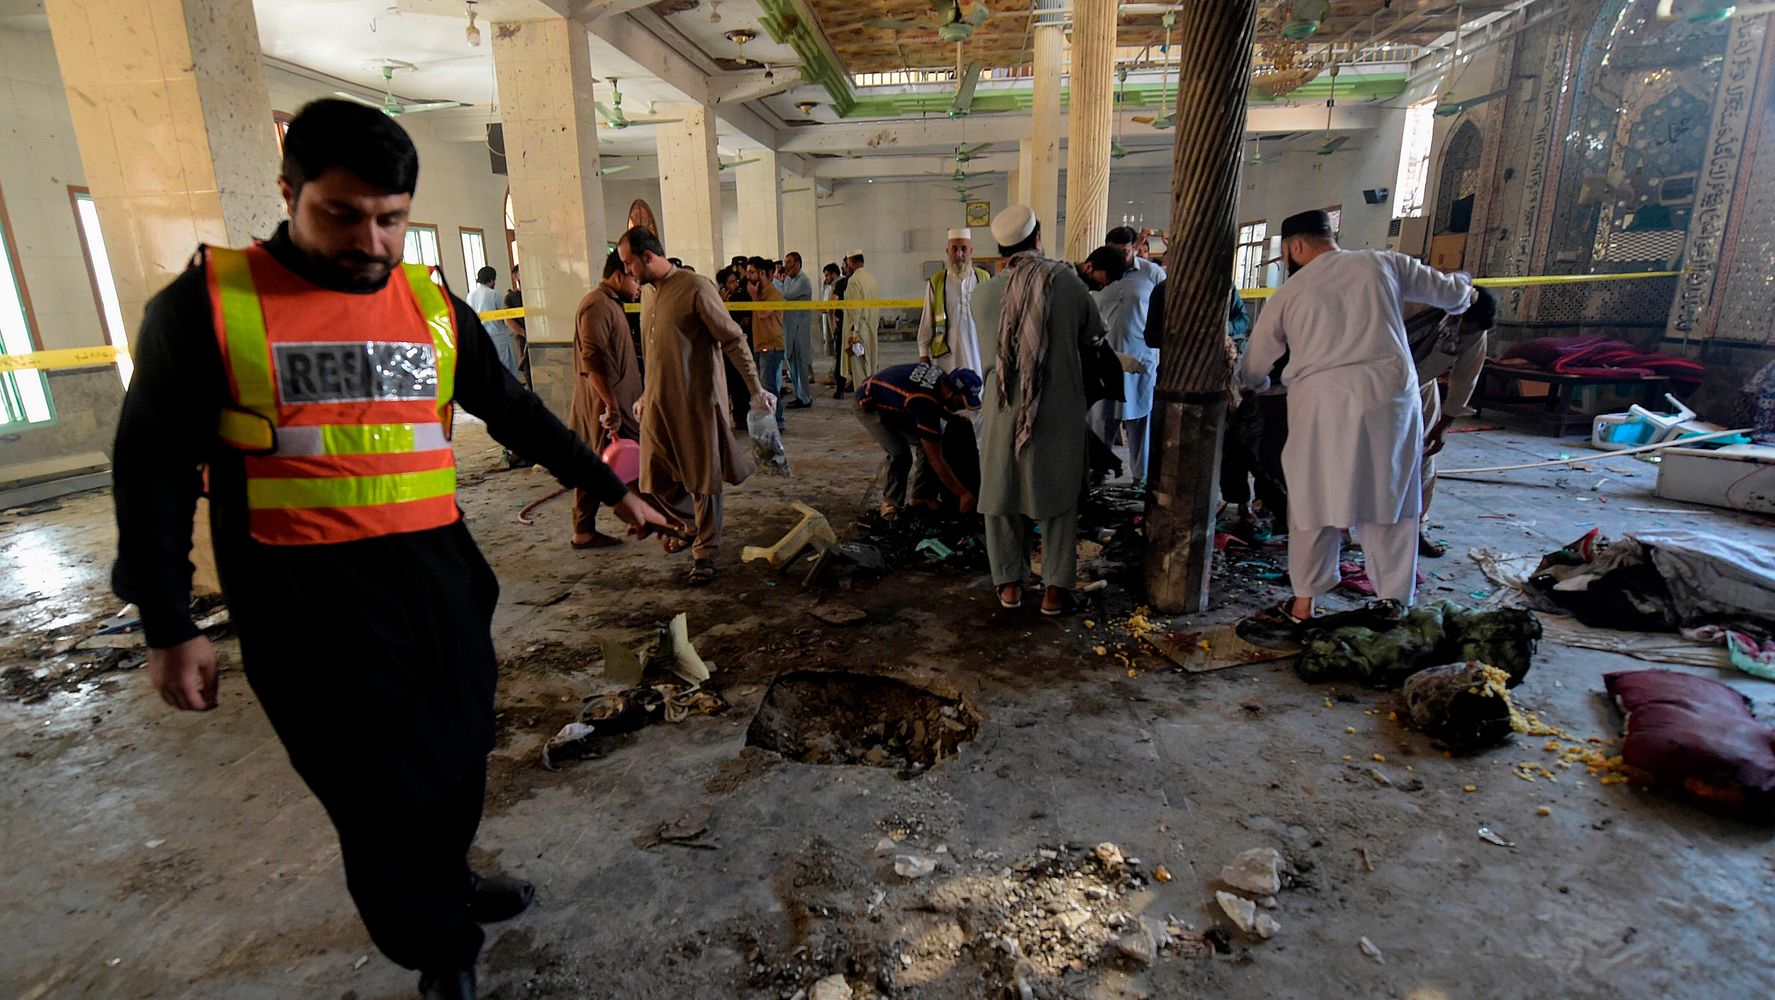 Bombing At Islamic Seminary In Pakistan Kills At Least 7 Students, Wounds 112